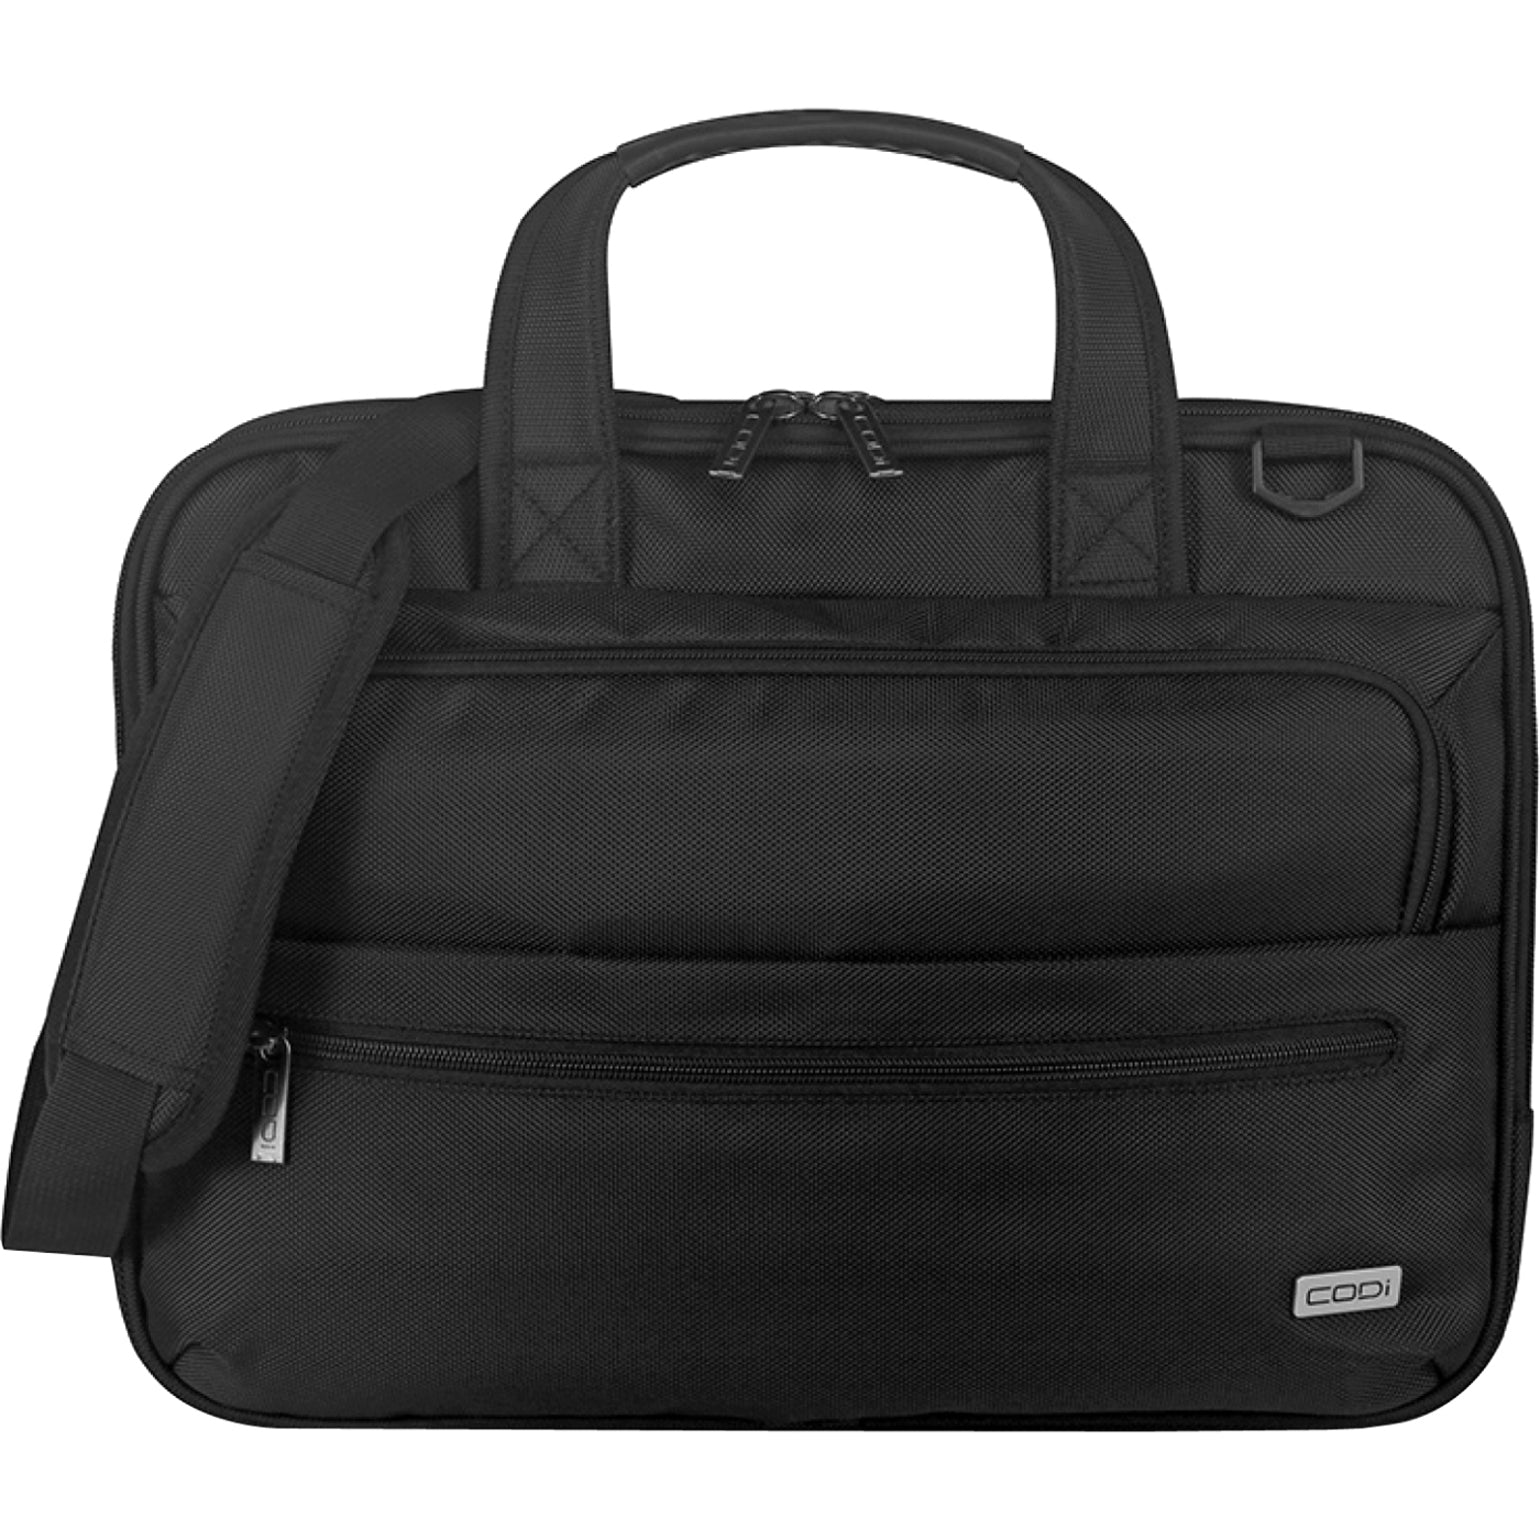 CODi FOR302-4 Fortis 14.1" Briefcase, Break Resistant, Black, Laptop and Tablet Compartment, Checkpoint Friendly